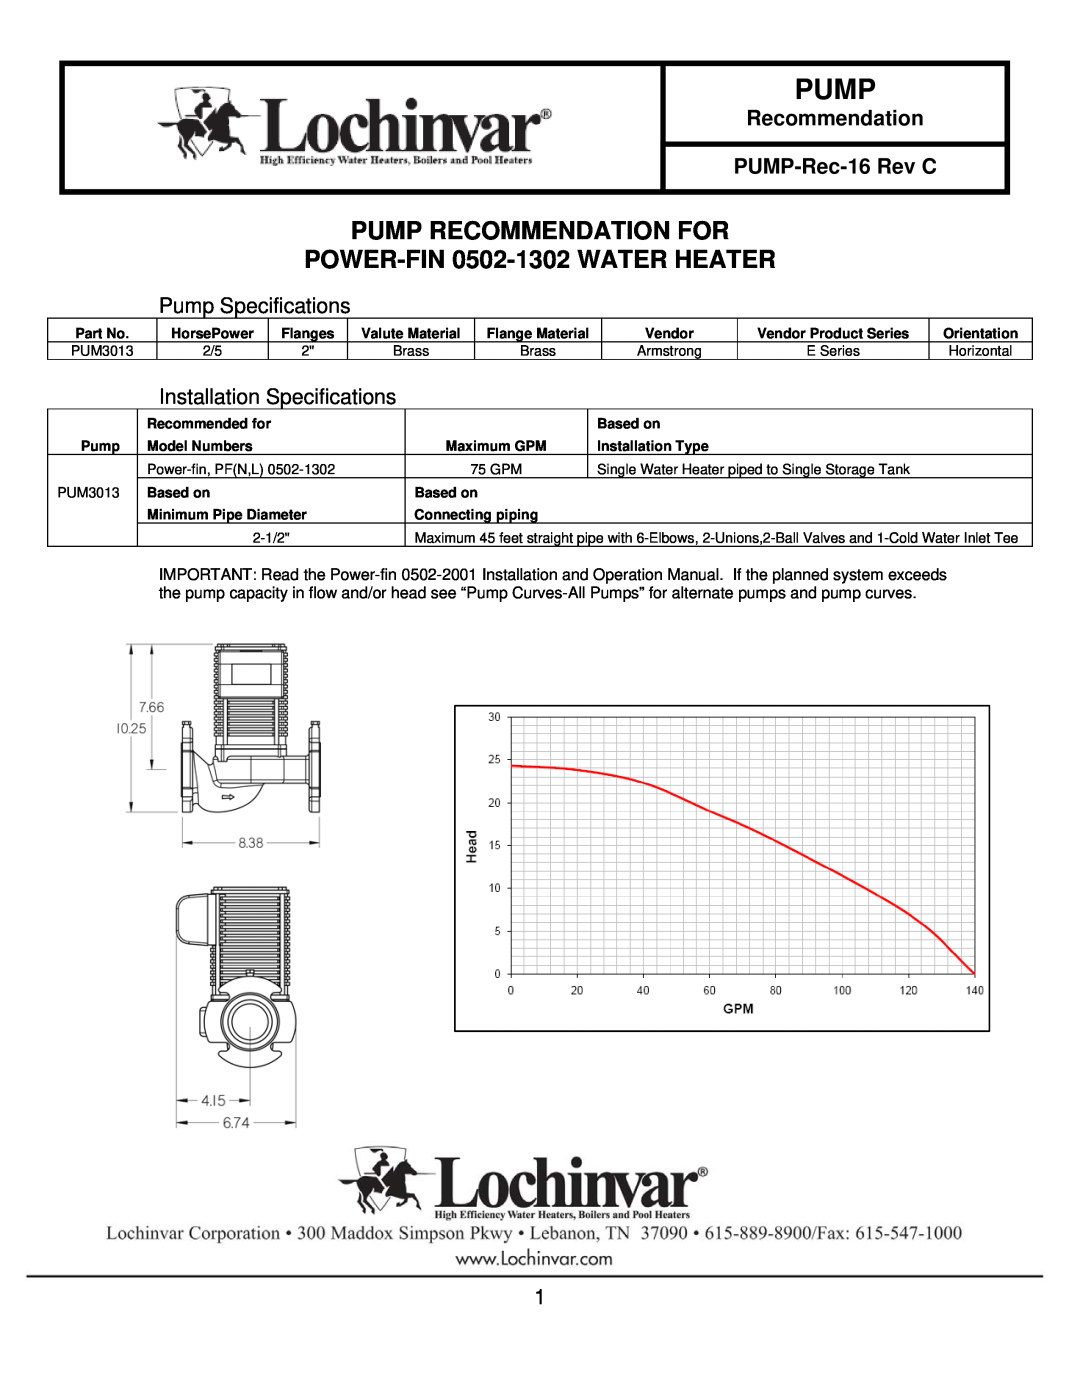 Lochinvar specifications Pump Recommendation For, POWER-FIN 0502-1302WATER HEATER, Pump Specifications, Based on 